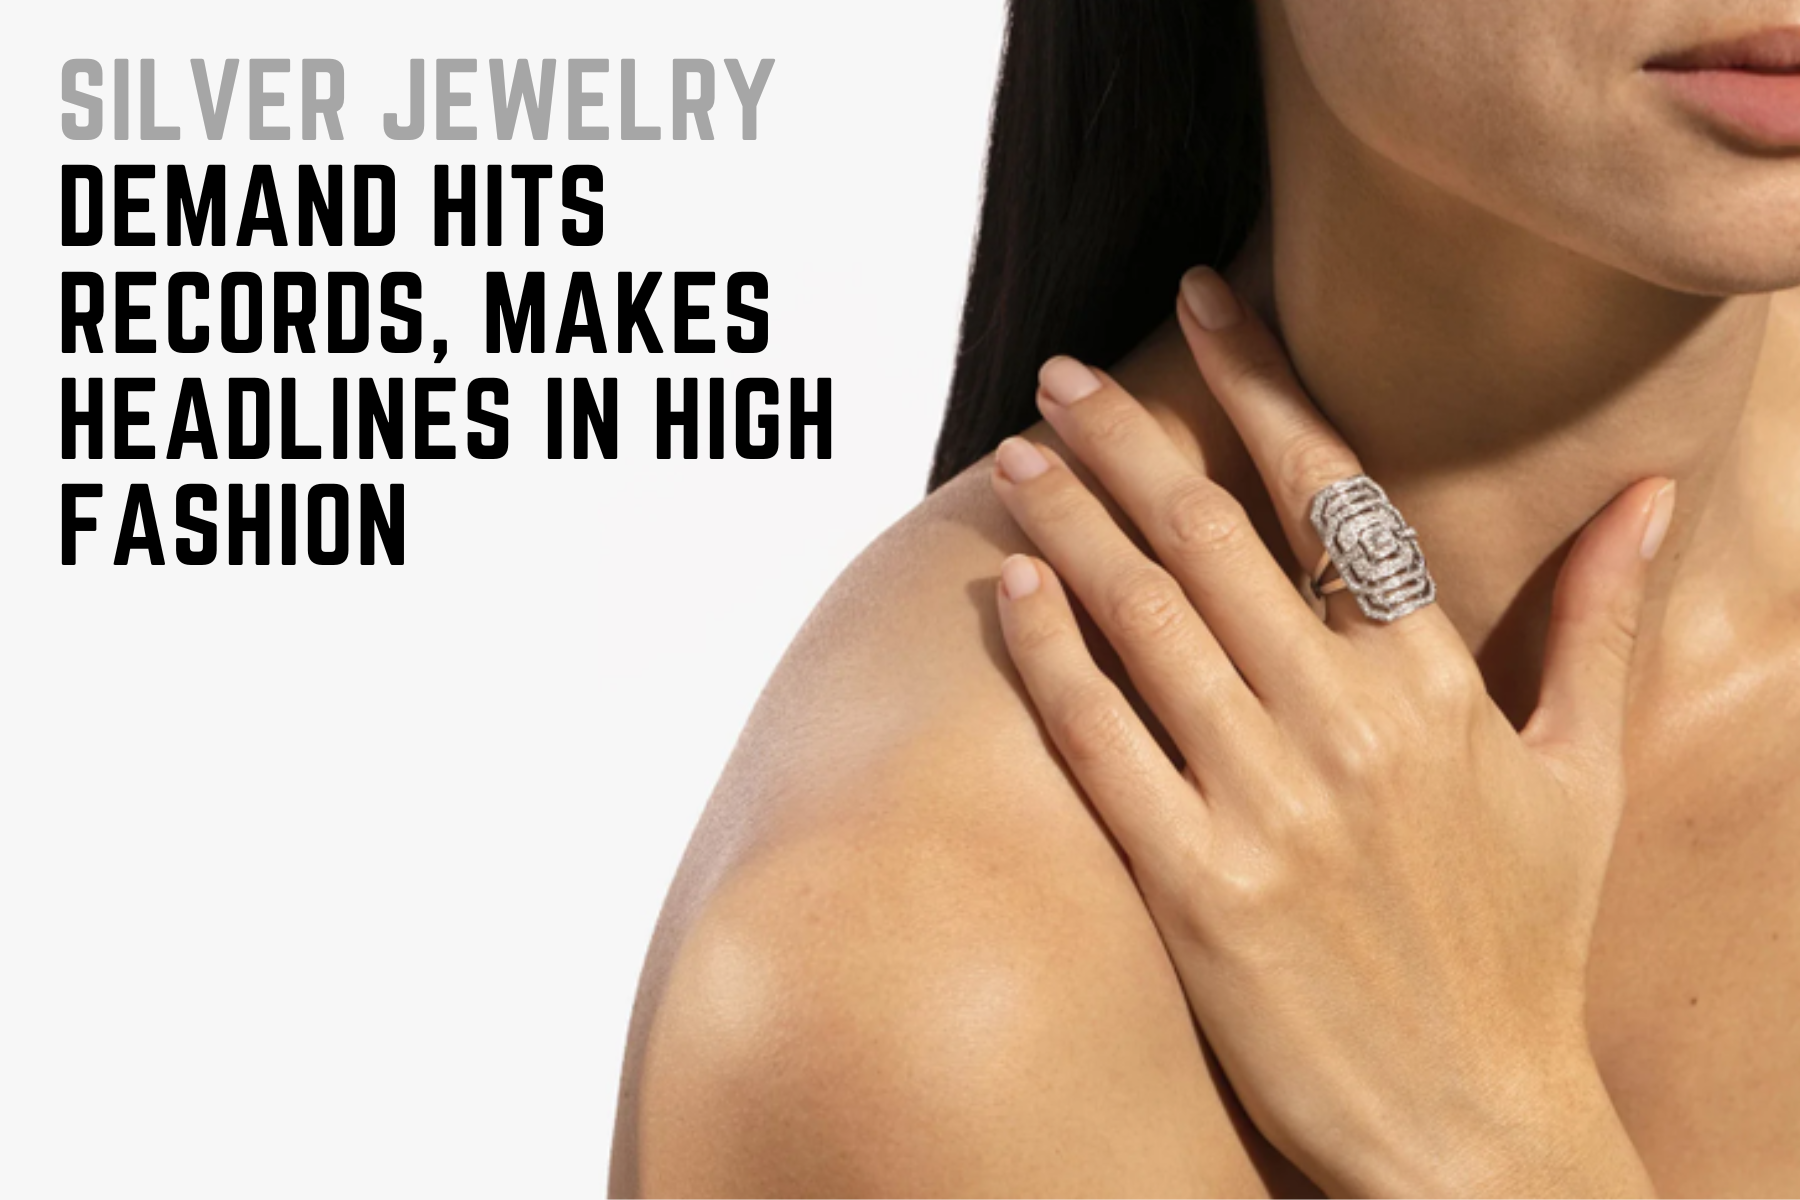 Silver Jewelry Demand Hits Records, Makes Headlines In High Fashion